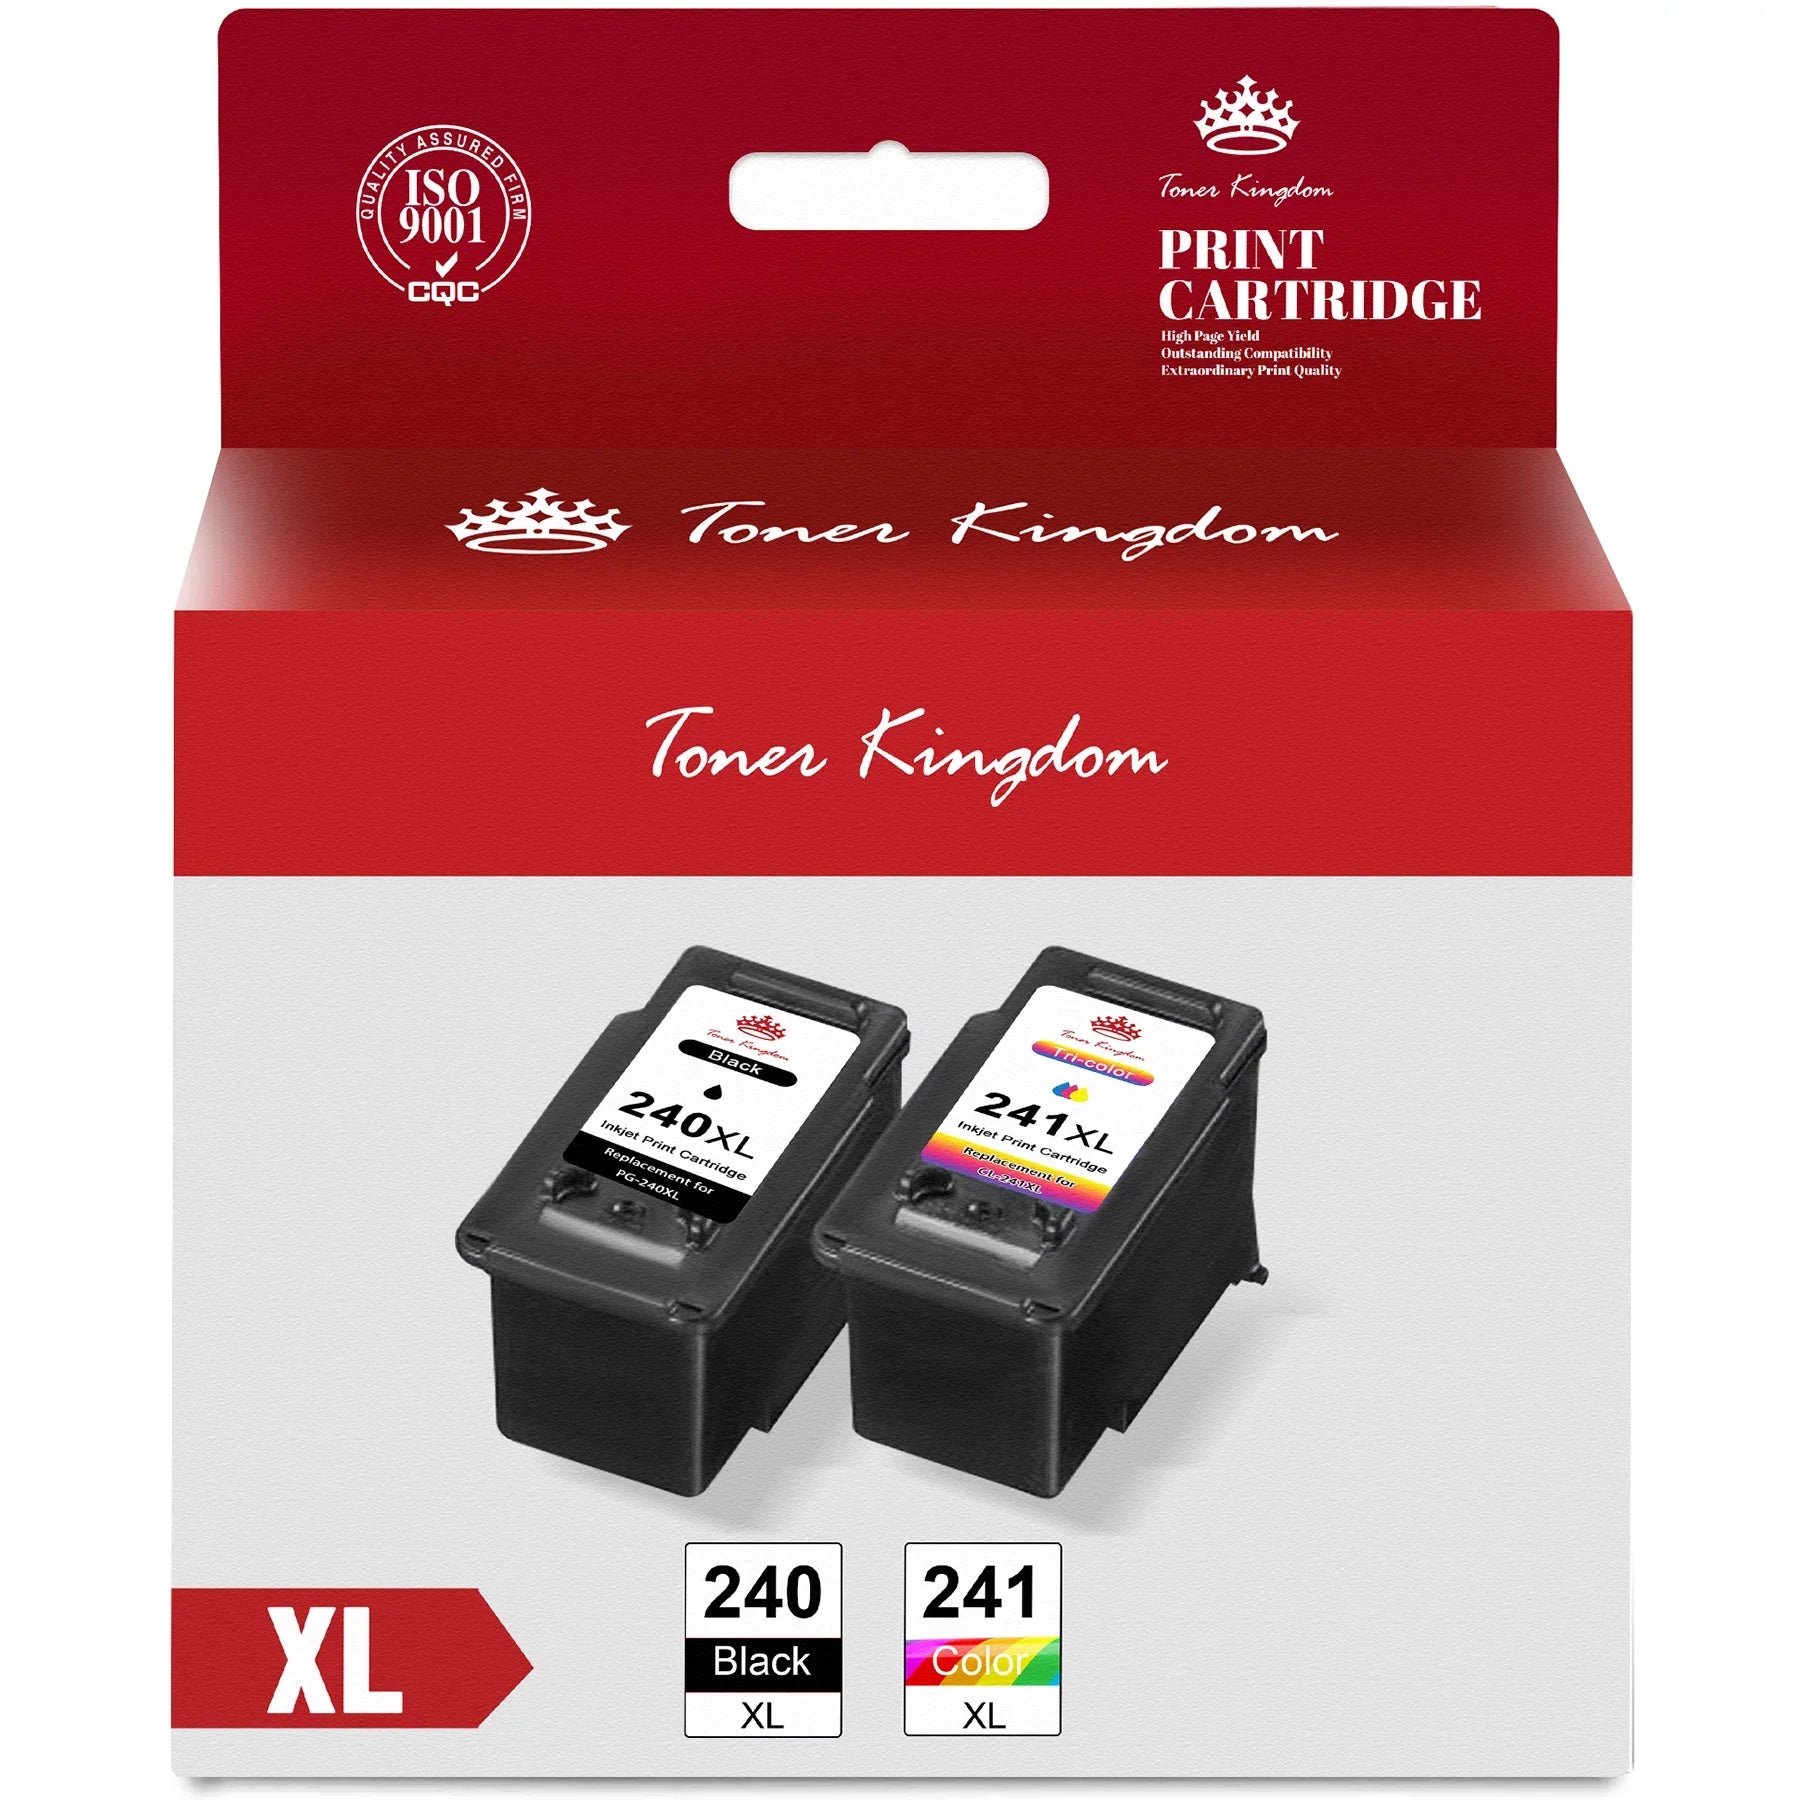 Ink & Toner-Toner Kingdom 240XL 241XL Ink Cartridge Replacement for Canon(2-Pack)